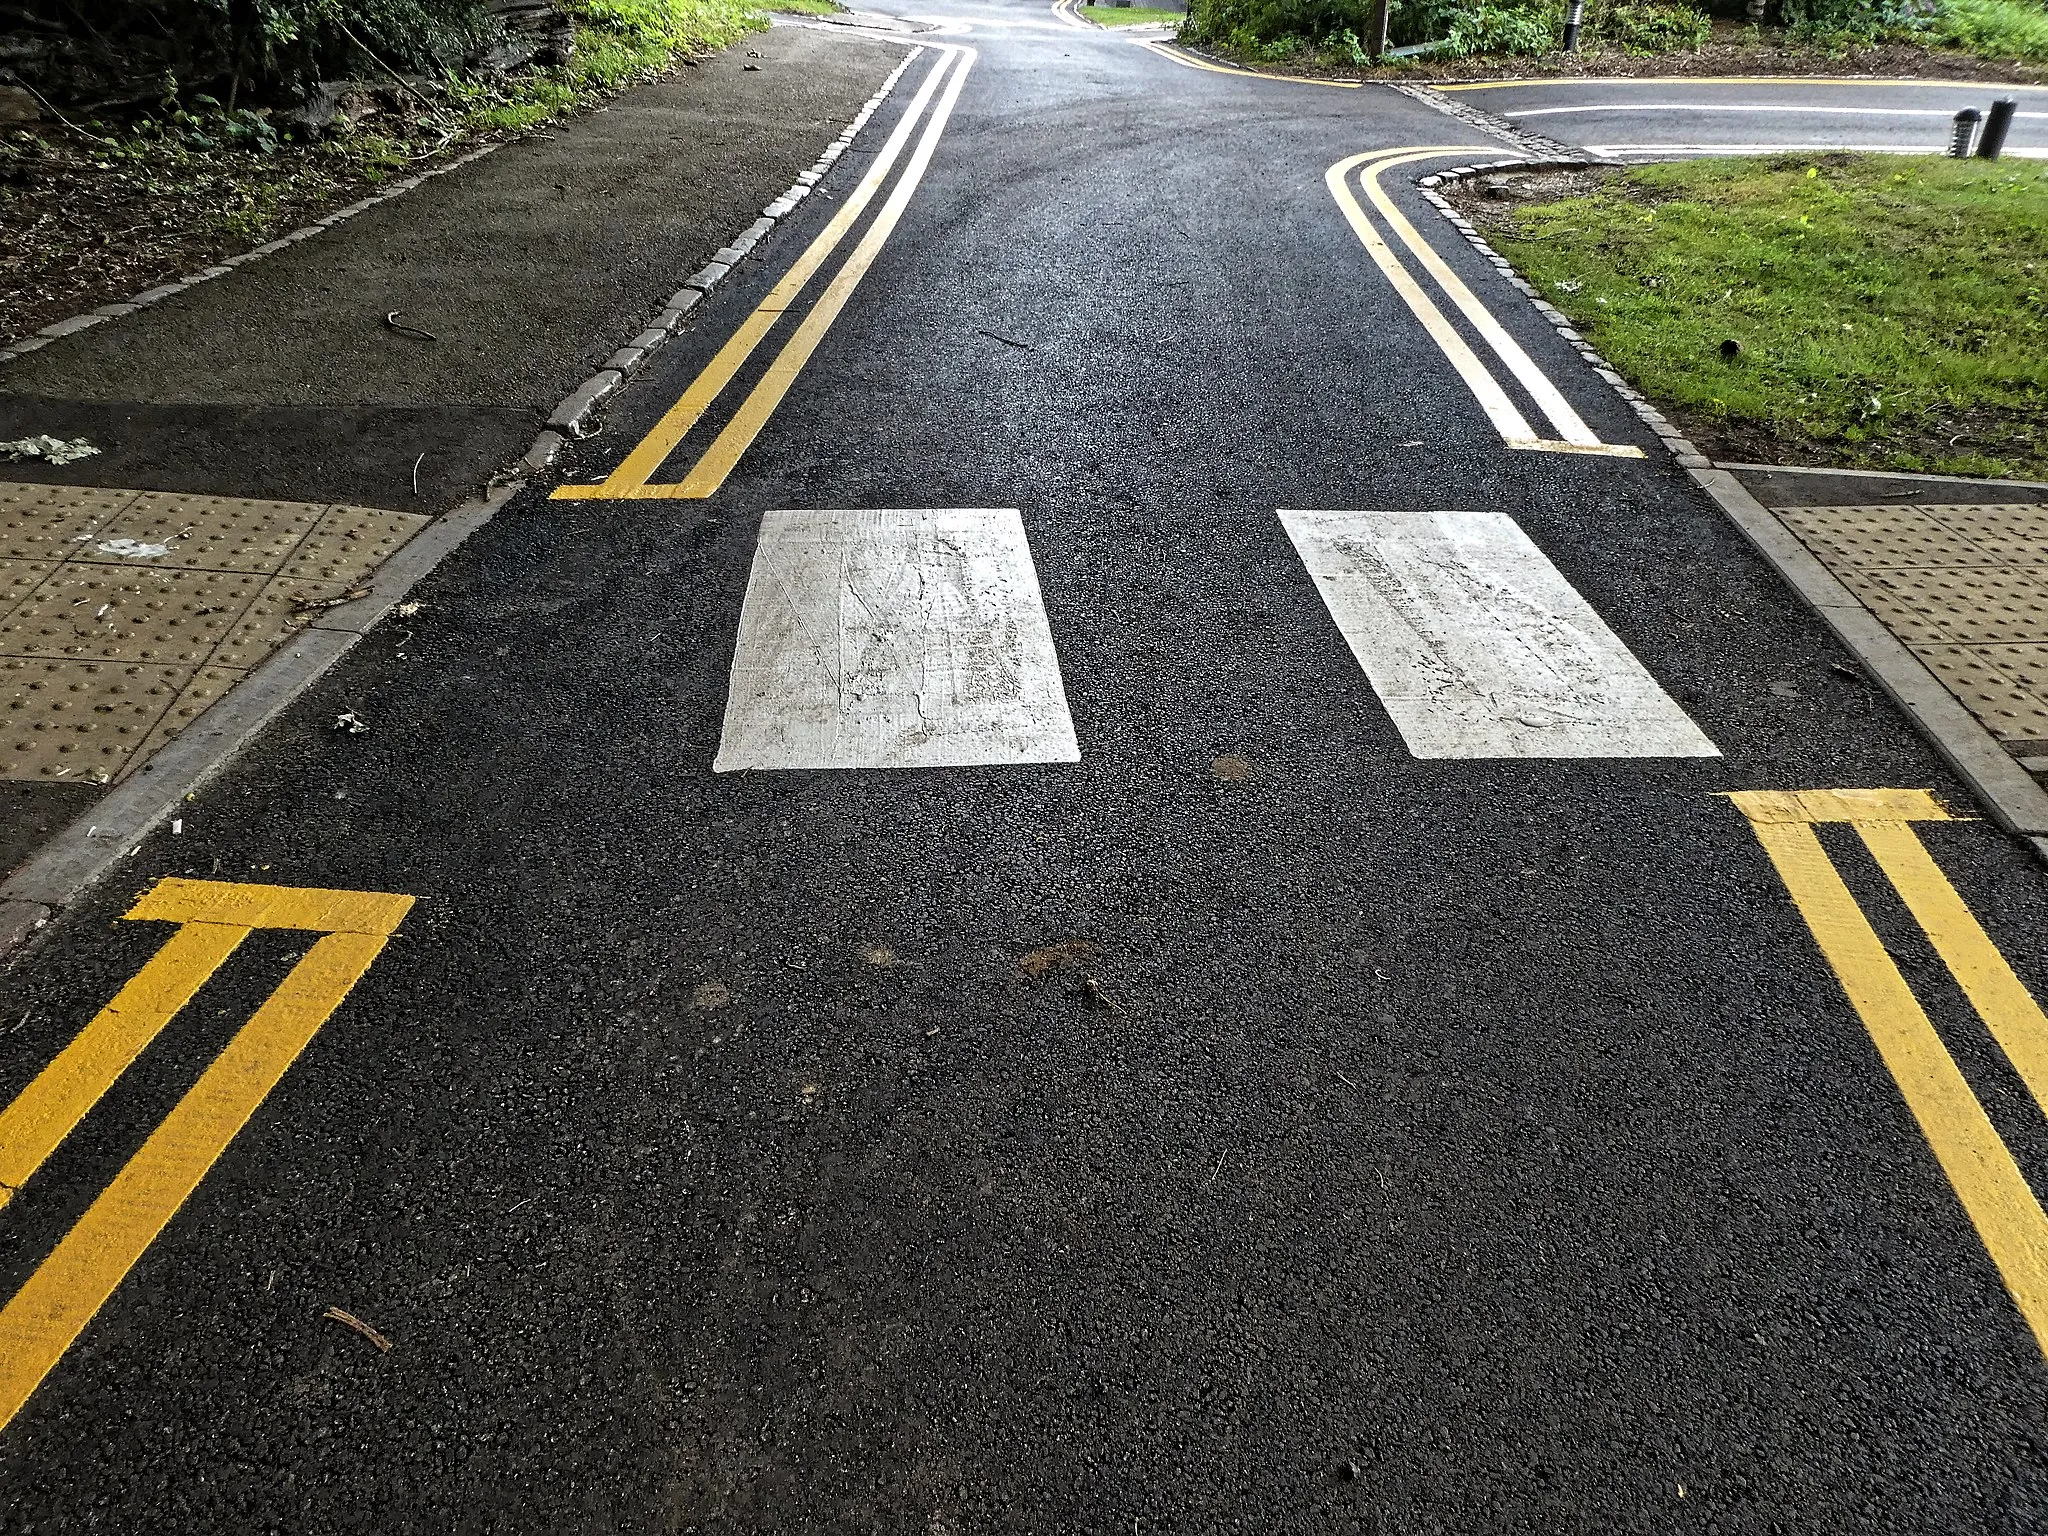 Photo showing: Road markings at the parking area for Visitor Centre in High Beach (alternatively High Beech) in Epping Forest and the parish of Waltham Abbey, Essex, England. Mobile device view: Wikimedia (at August 2019) makes it difficult to immediately view photo groups related to this image. To see its most relevant allied photos, click on Epping Forest, High Beach, and this uploader's Paths photos. You can add a beta click-through 'categories' button to the very bottom of photo-pages you view by going to settings... three-bar icon top left. Desktop view: Wikimedia (at August 2019) makes it difficult to immediately view the helpful category links where you can find images related to this one in a variety of ways; for these go to the very bottom of the page. This image is one of a series of date and/or subject allied consecutive photographs kept in progression or location by file name number and/or time marking. Camera: Panasonic Lumix DMC-TZ90. Software: File lens-corrected, optimized, perhaps cropped, with DxO PhotoLab 2 Elite, and likely further optimized with Adobe Photoshop CS2.